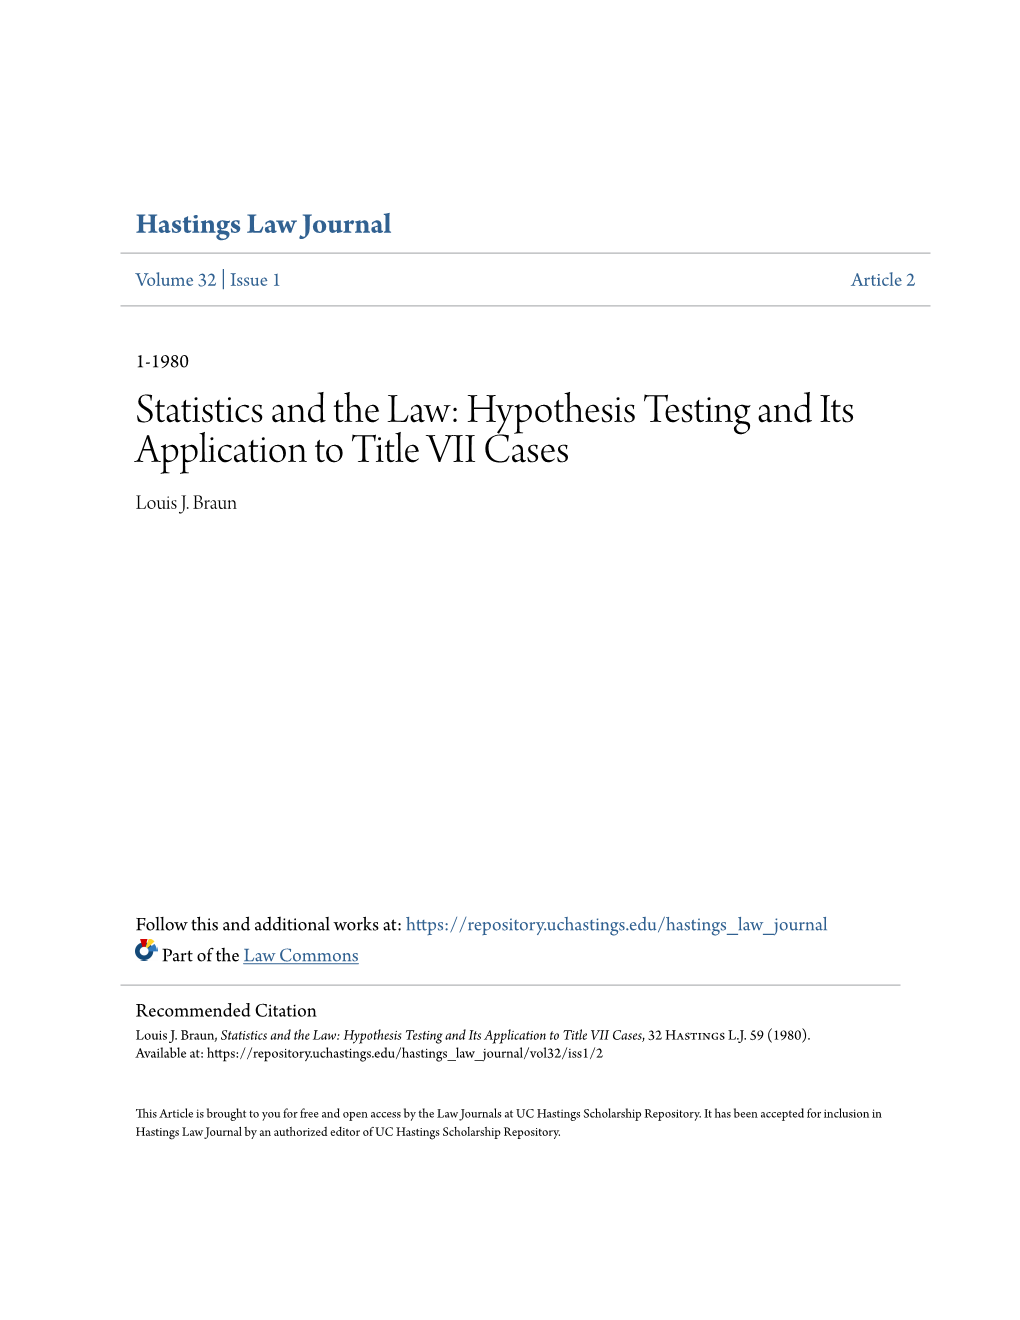 Statistics and the Law: Hypothesis Testing and Its Application to Title VII Cases Louis J